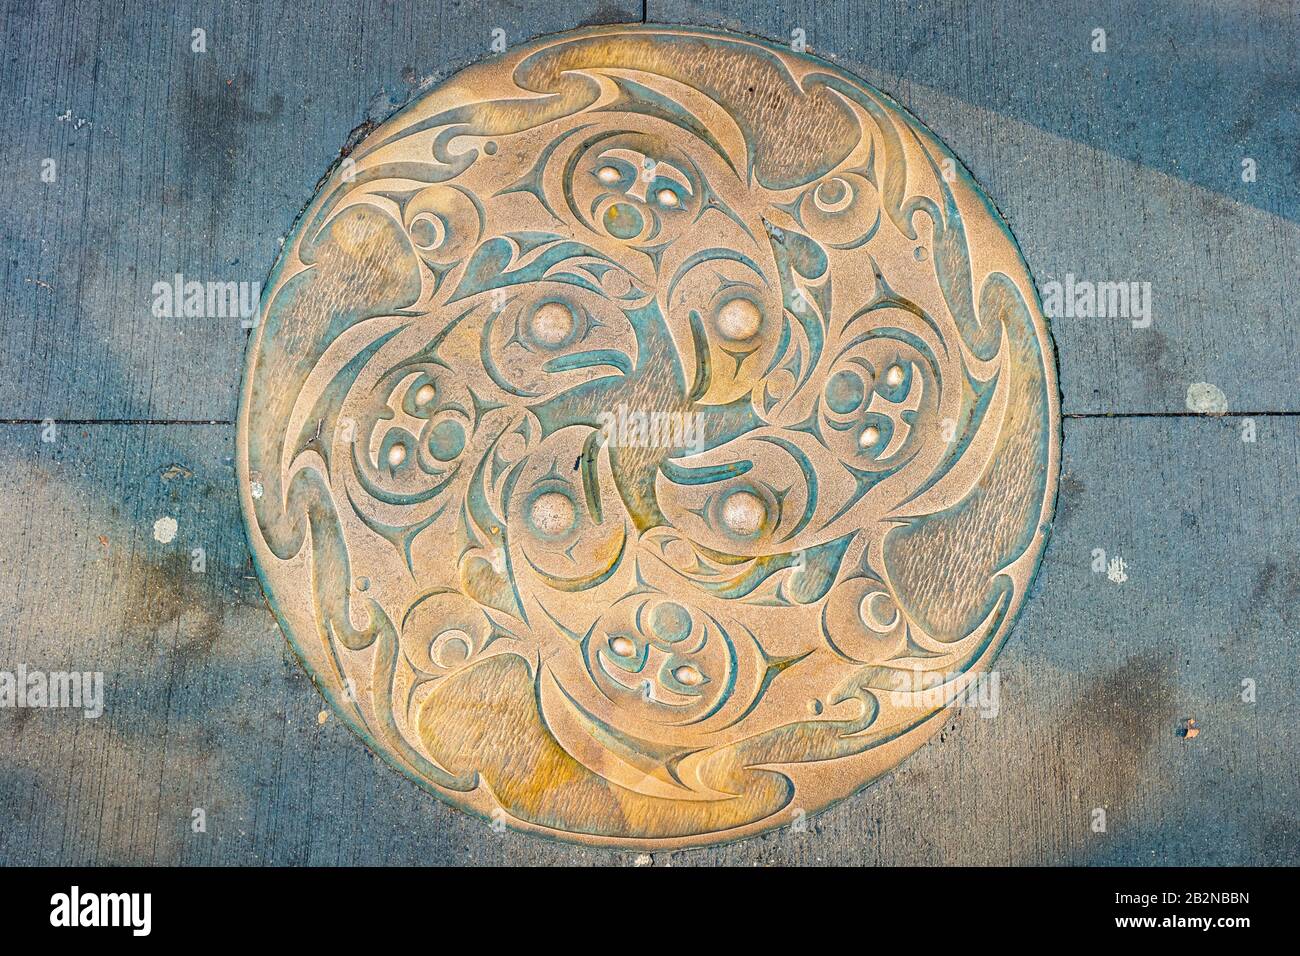 Ornate first nation themed manhole cover in downtown Vancouver Canada. Stock Photo